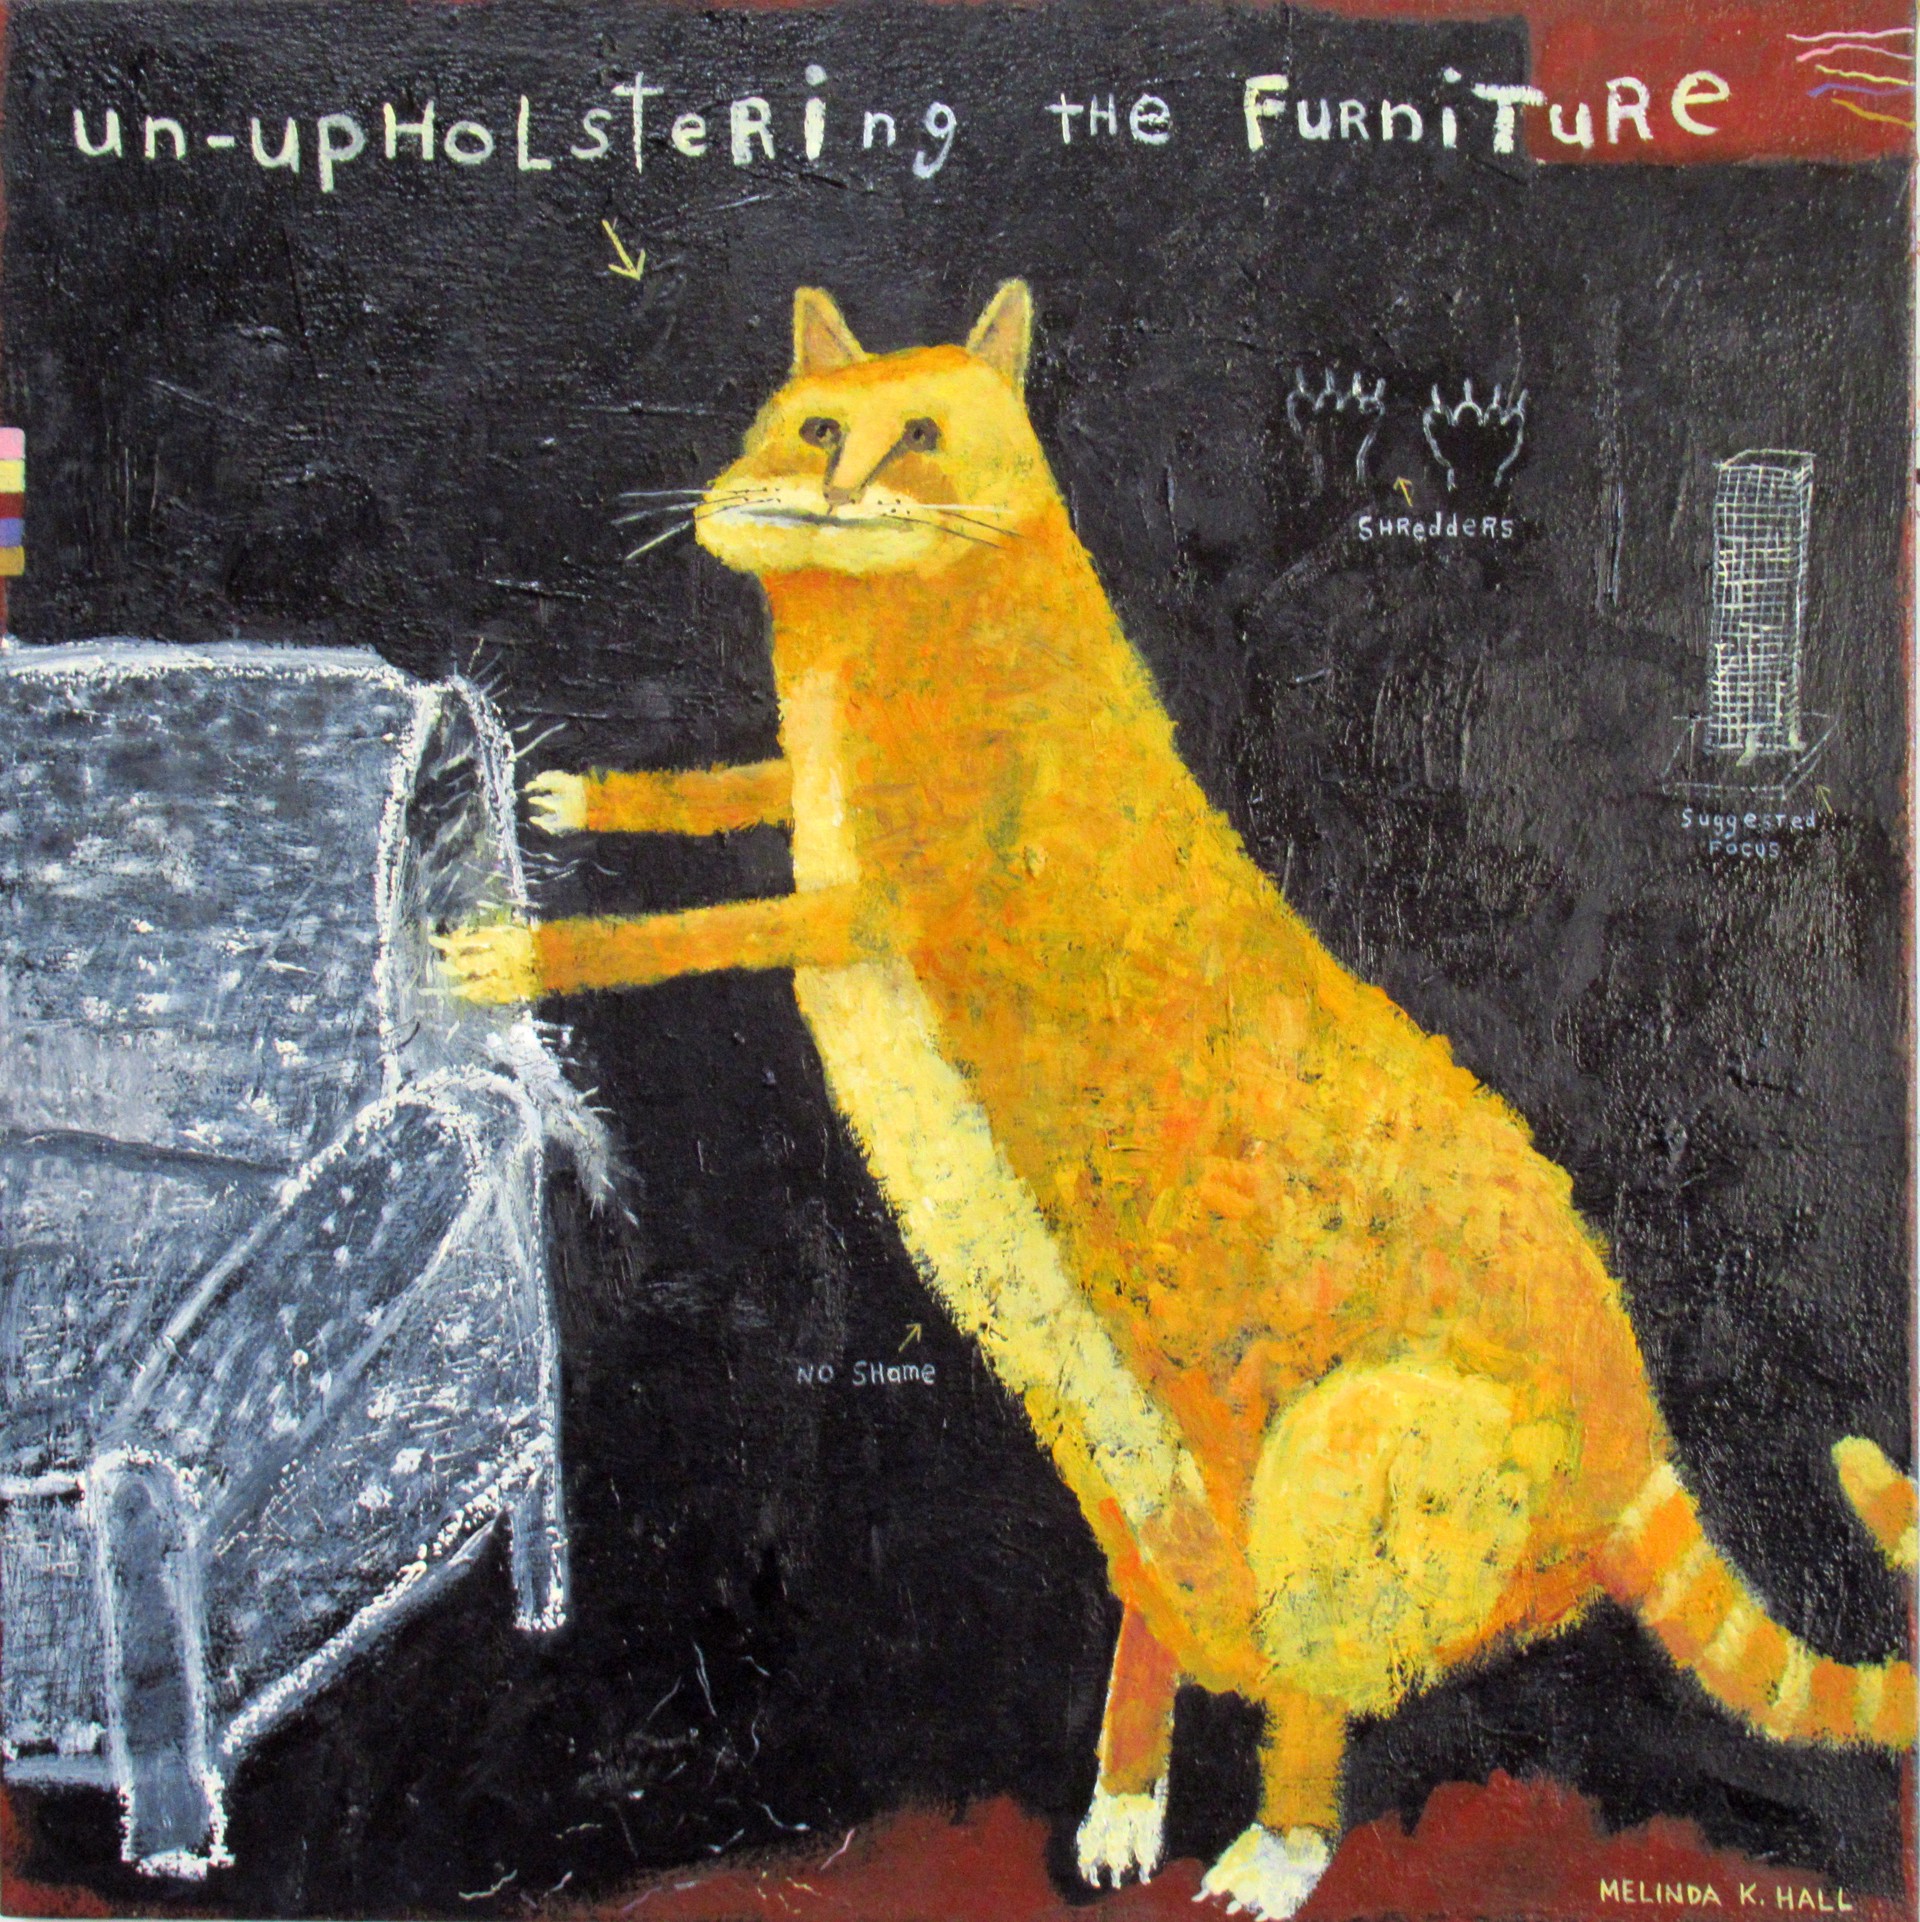 Un-Upholstering the Furniture by Melinda K. Hall